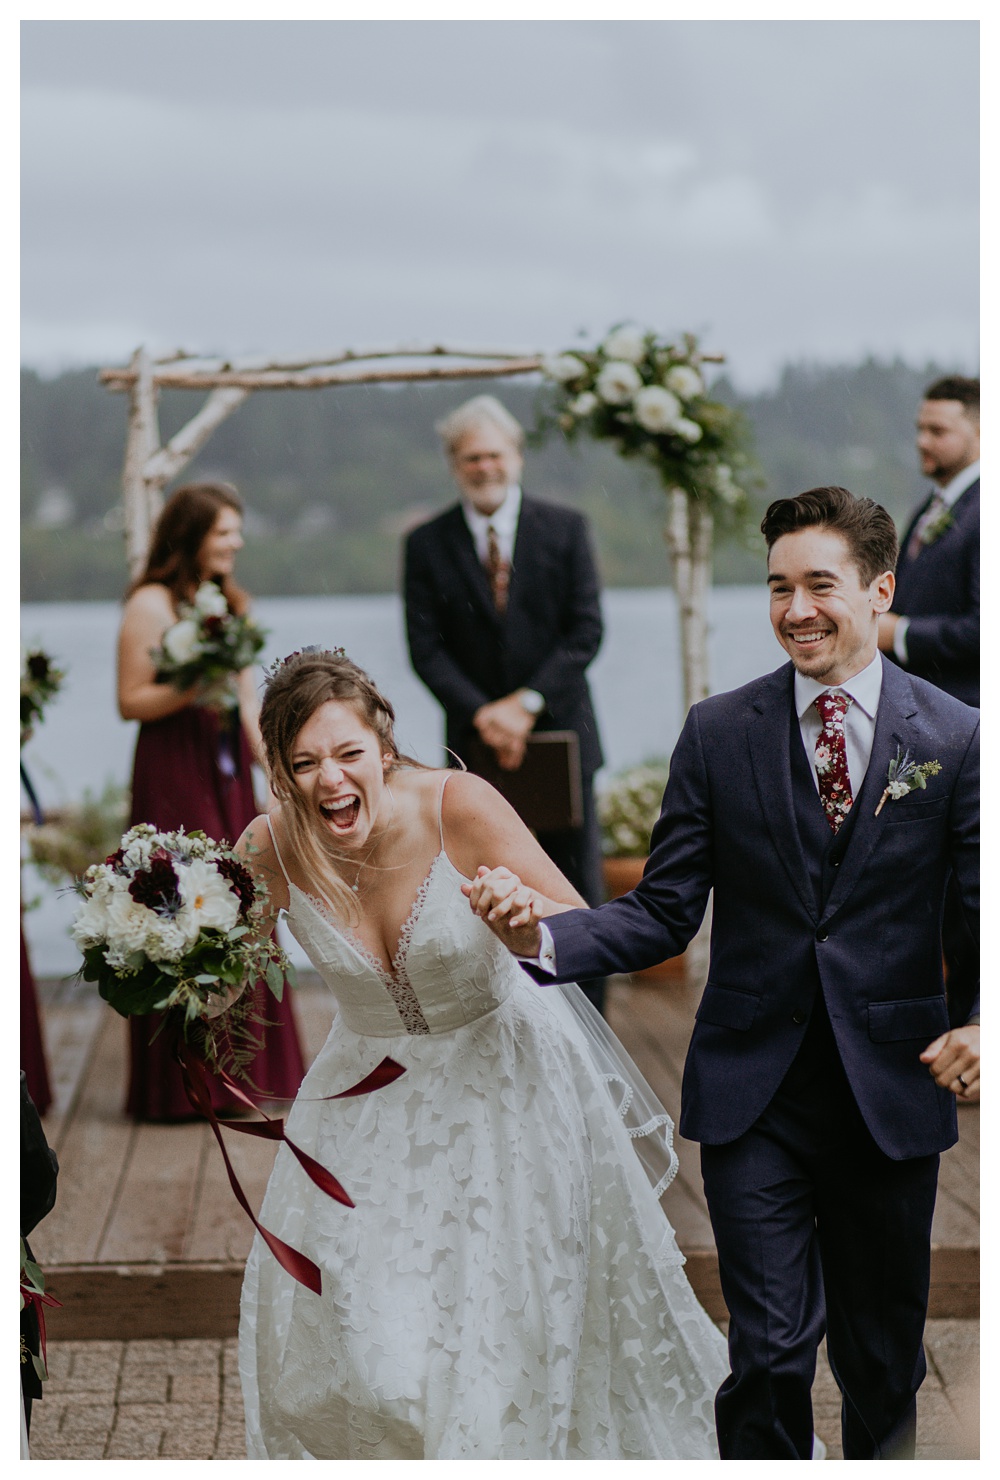 the excitement of being married as the bride laughs uncontrollably from marrying her groom at the Kiana Lodge in Washington State.